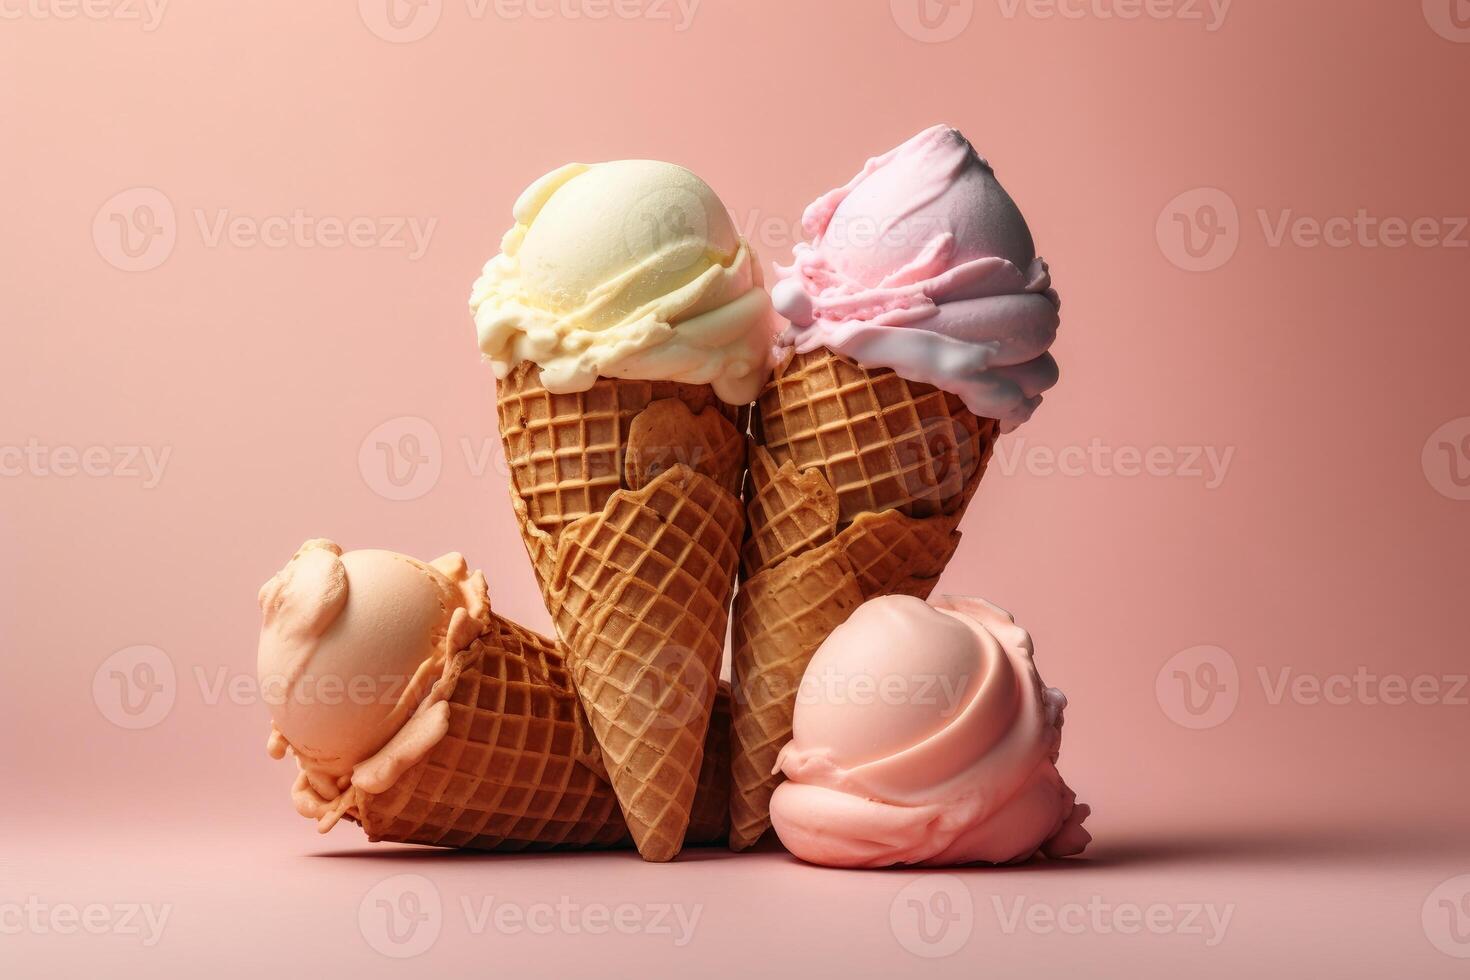 Delicious ice cream cones with several ice cream scoops against a pastel colored background created with technology. photo